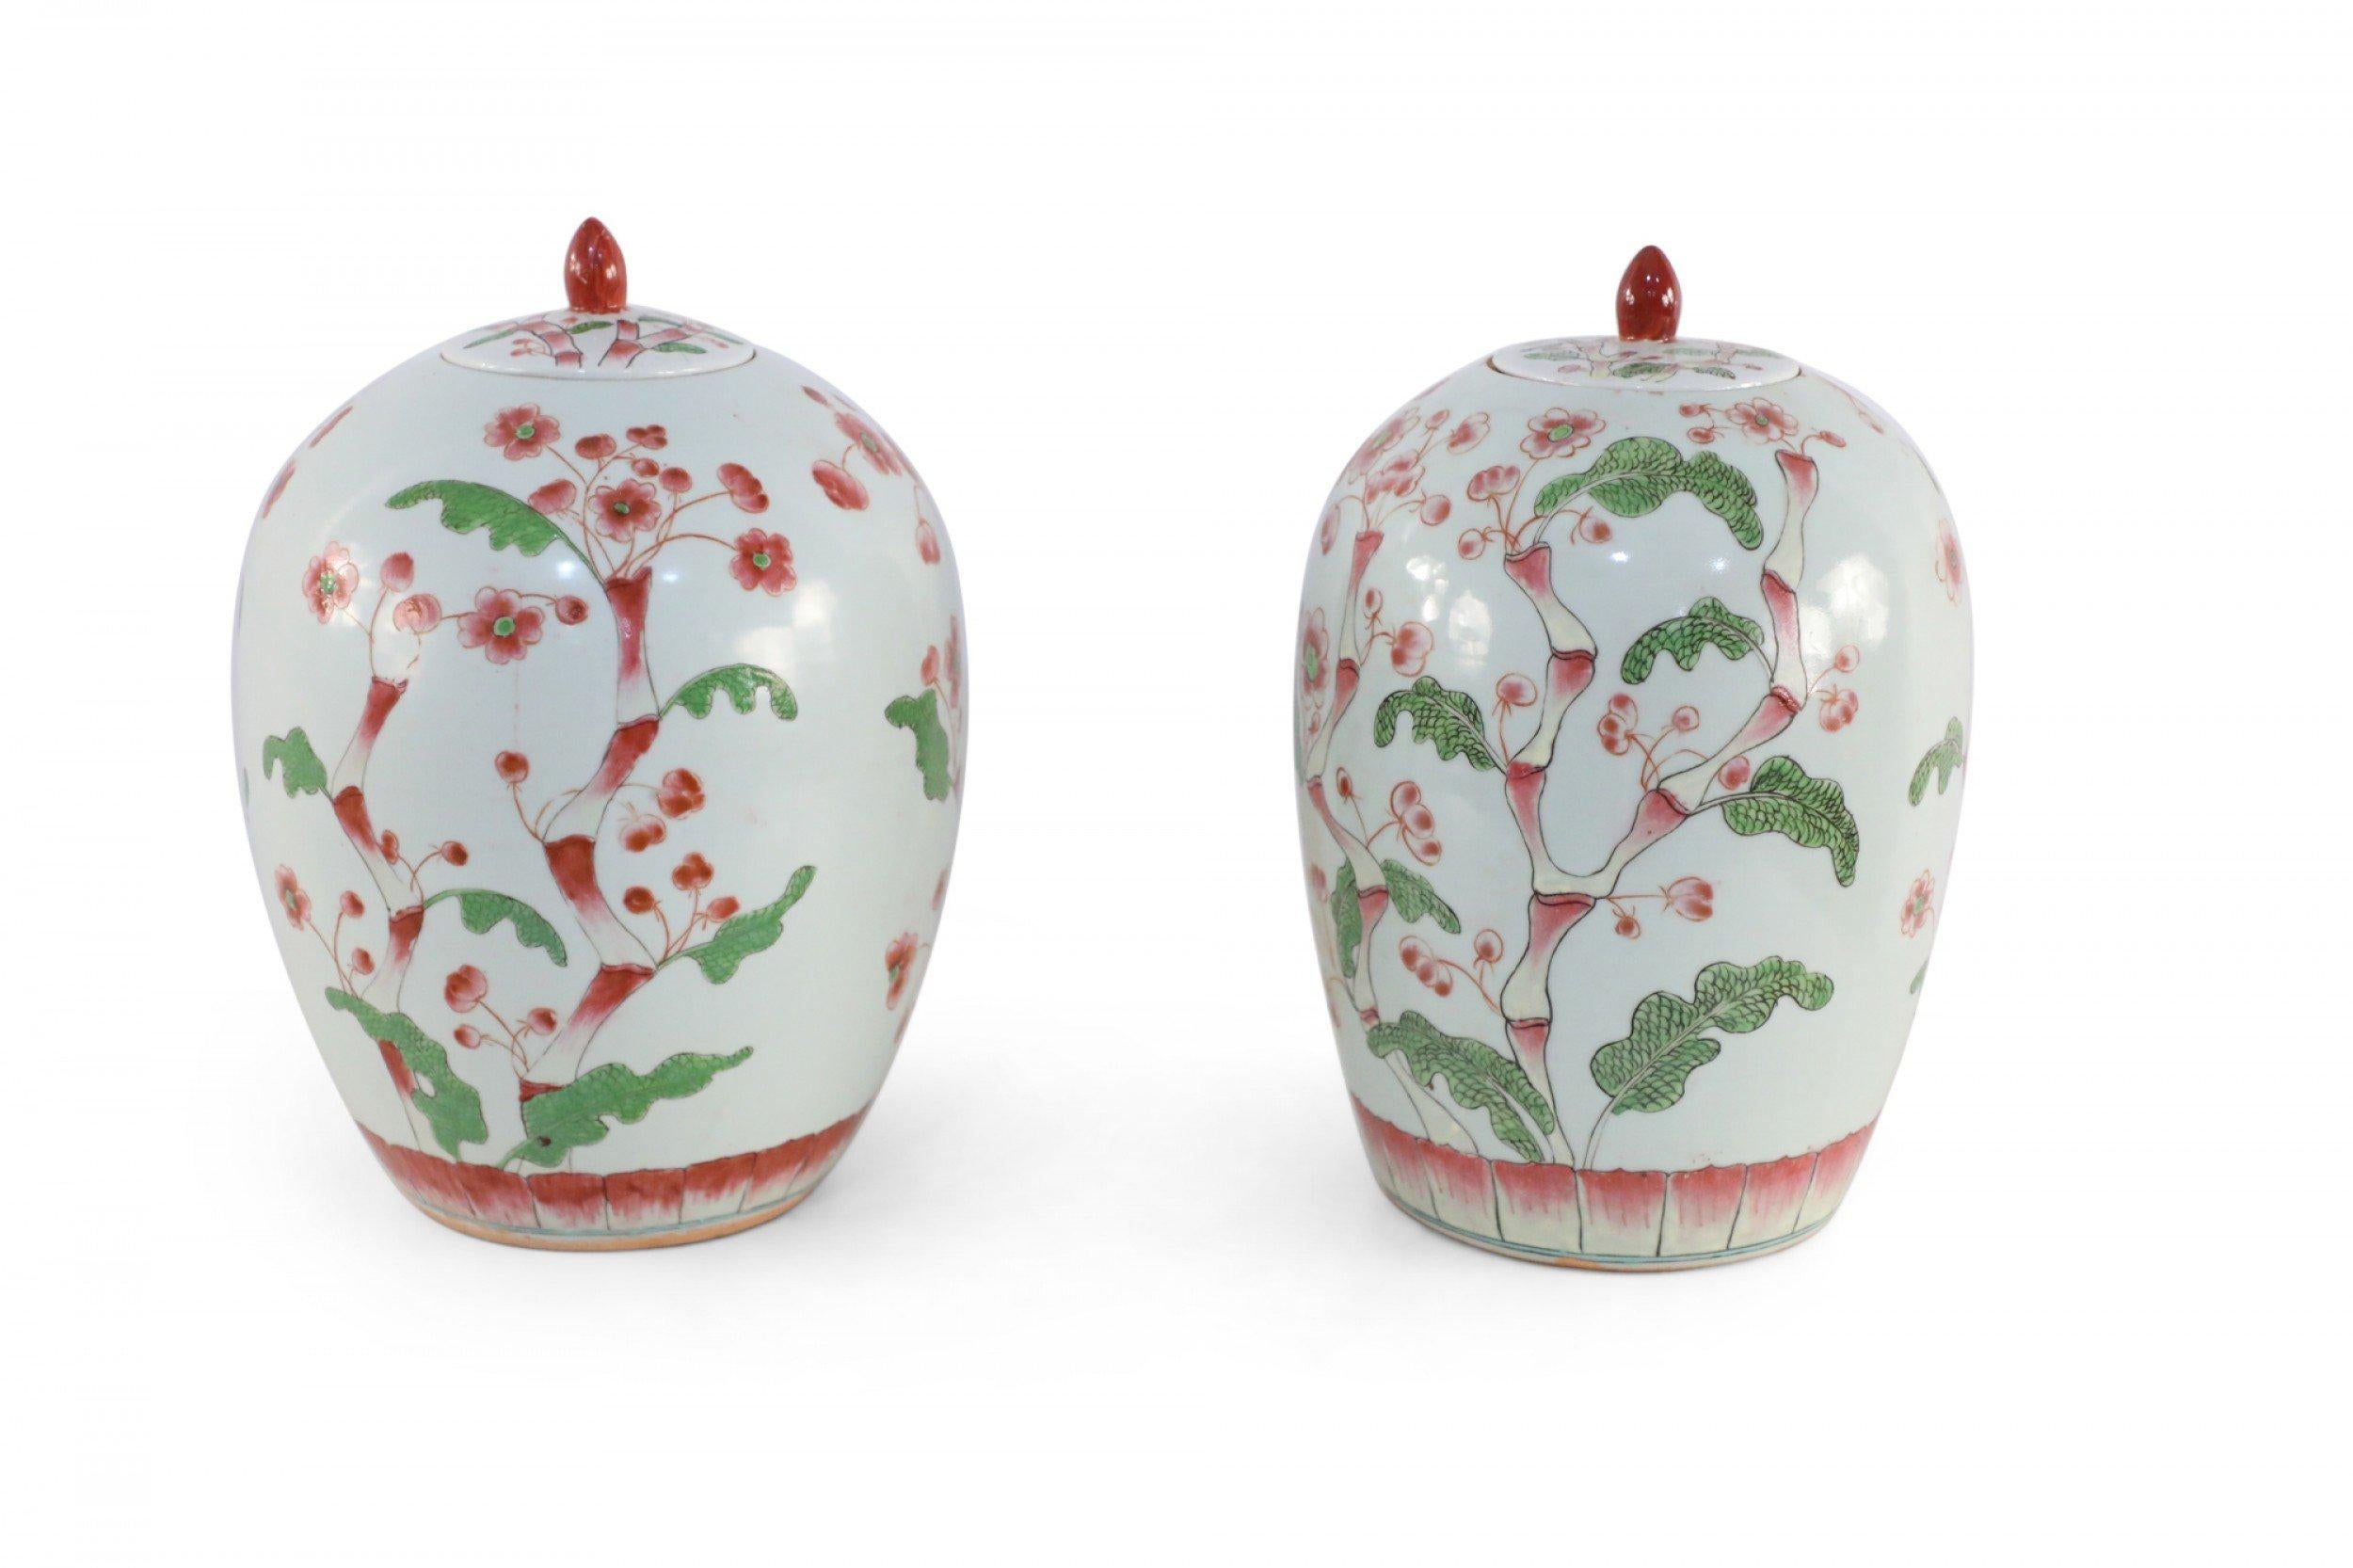 Pair of Chinese White and Pink Cherry Blossom Motif Lidded Porcelain Urns For Sale 5